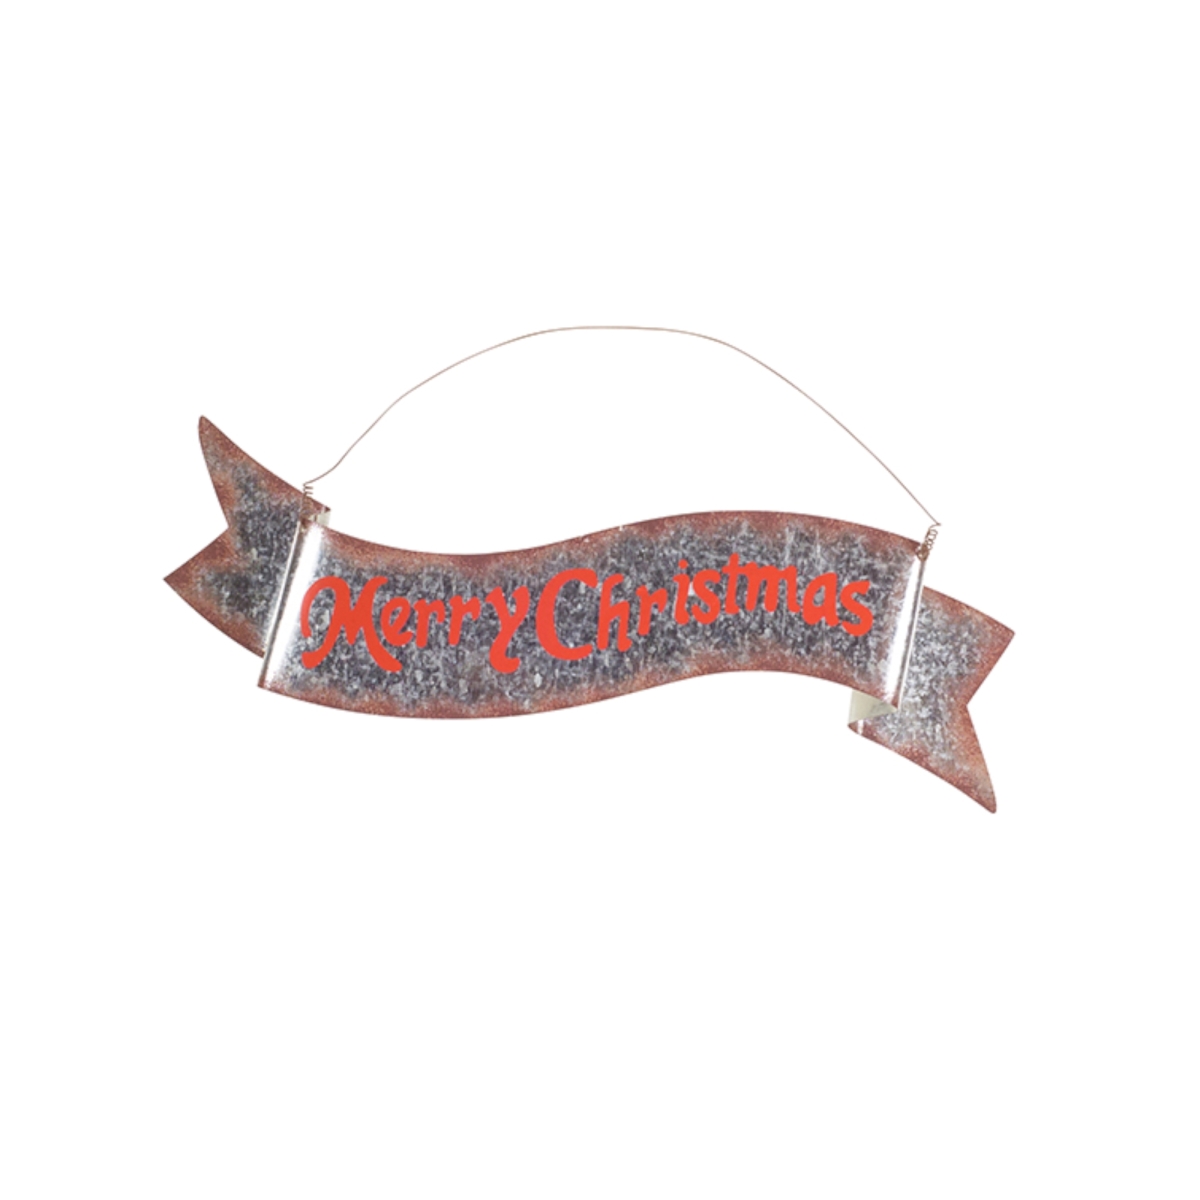 73014ds 8 X 14.25 In. Iron Merry Christmas Banner, Red & Silver - Set Of 12